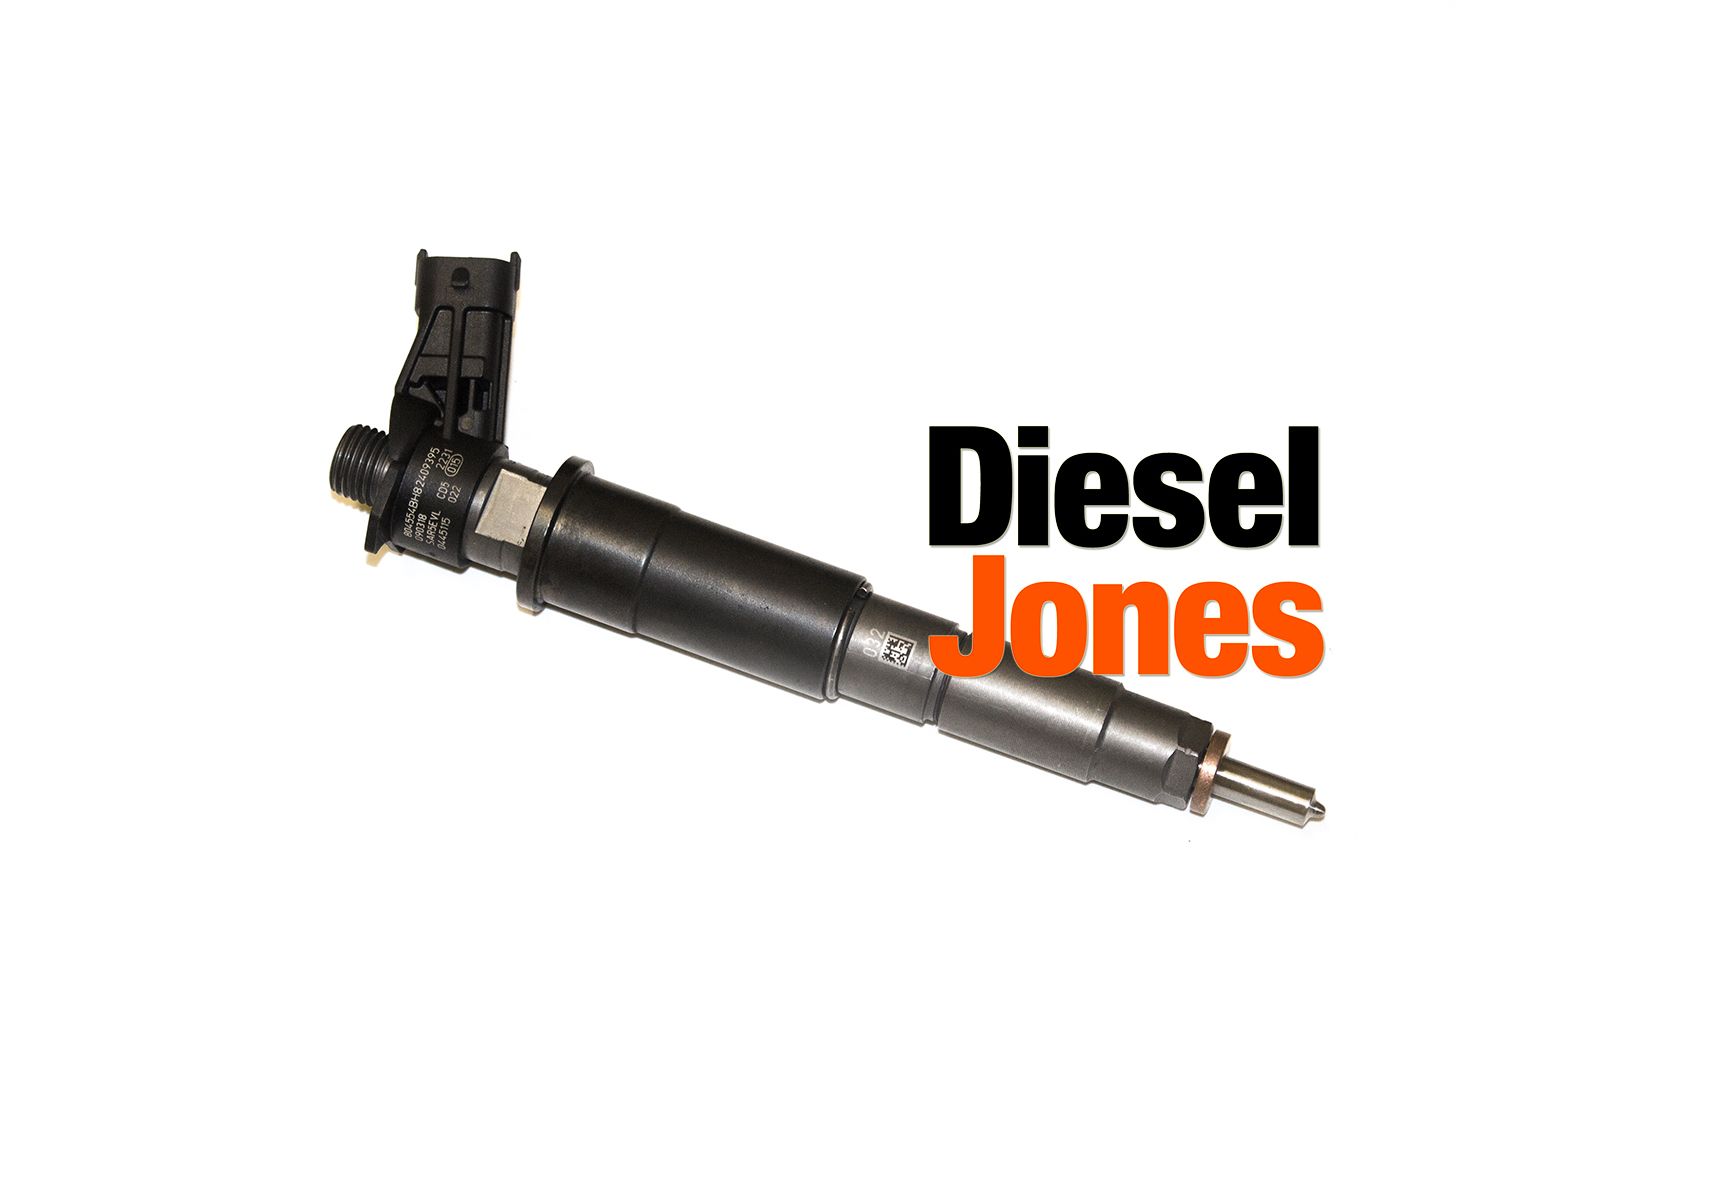 Details about   BOSCH Diesel Injector for BMW X3 E83  X5 E70  X6 E71 E72  0445115077 13537808089